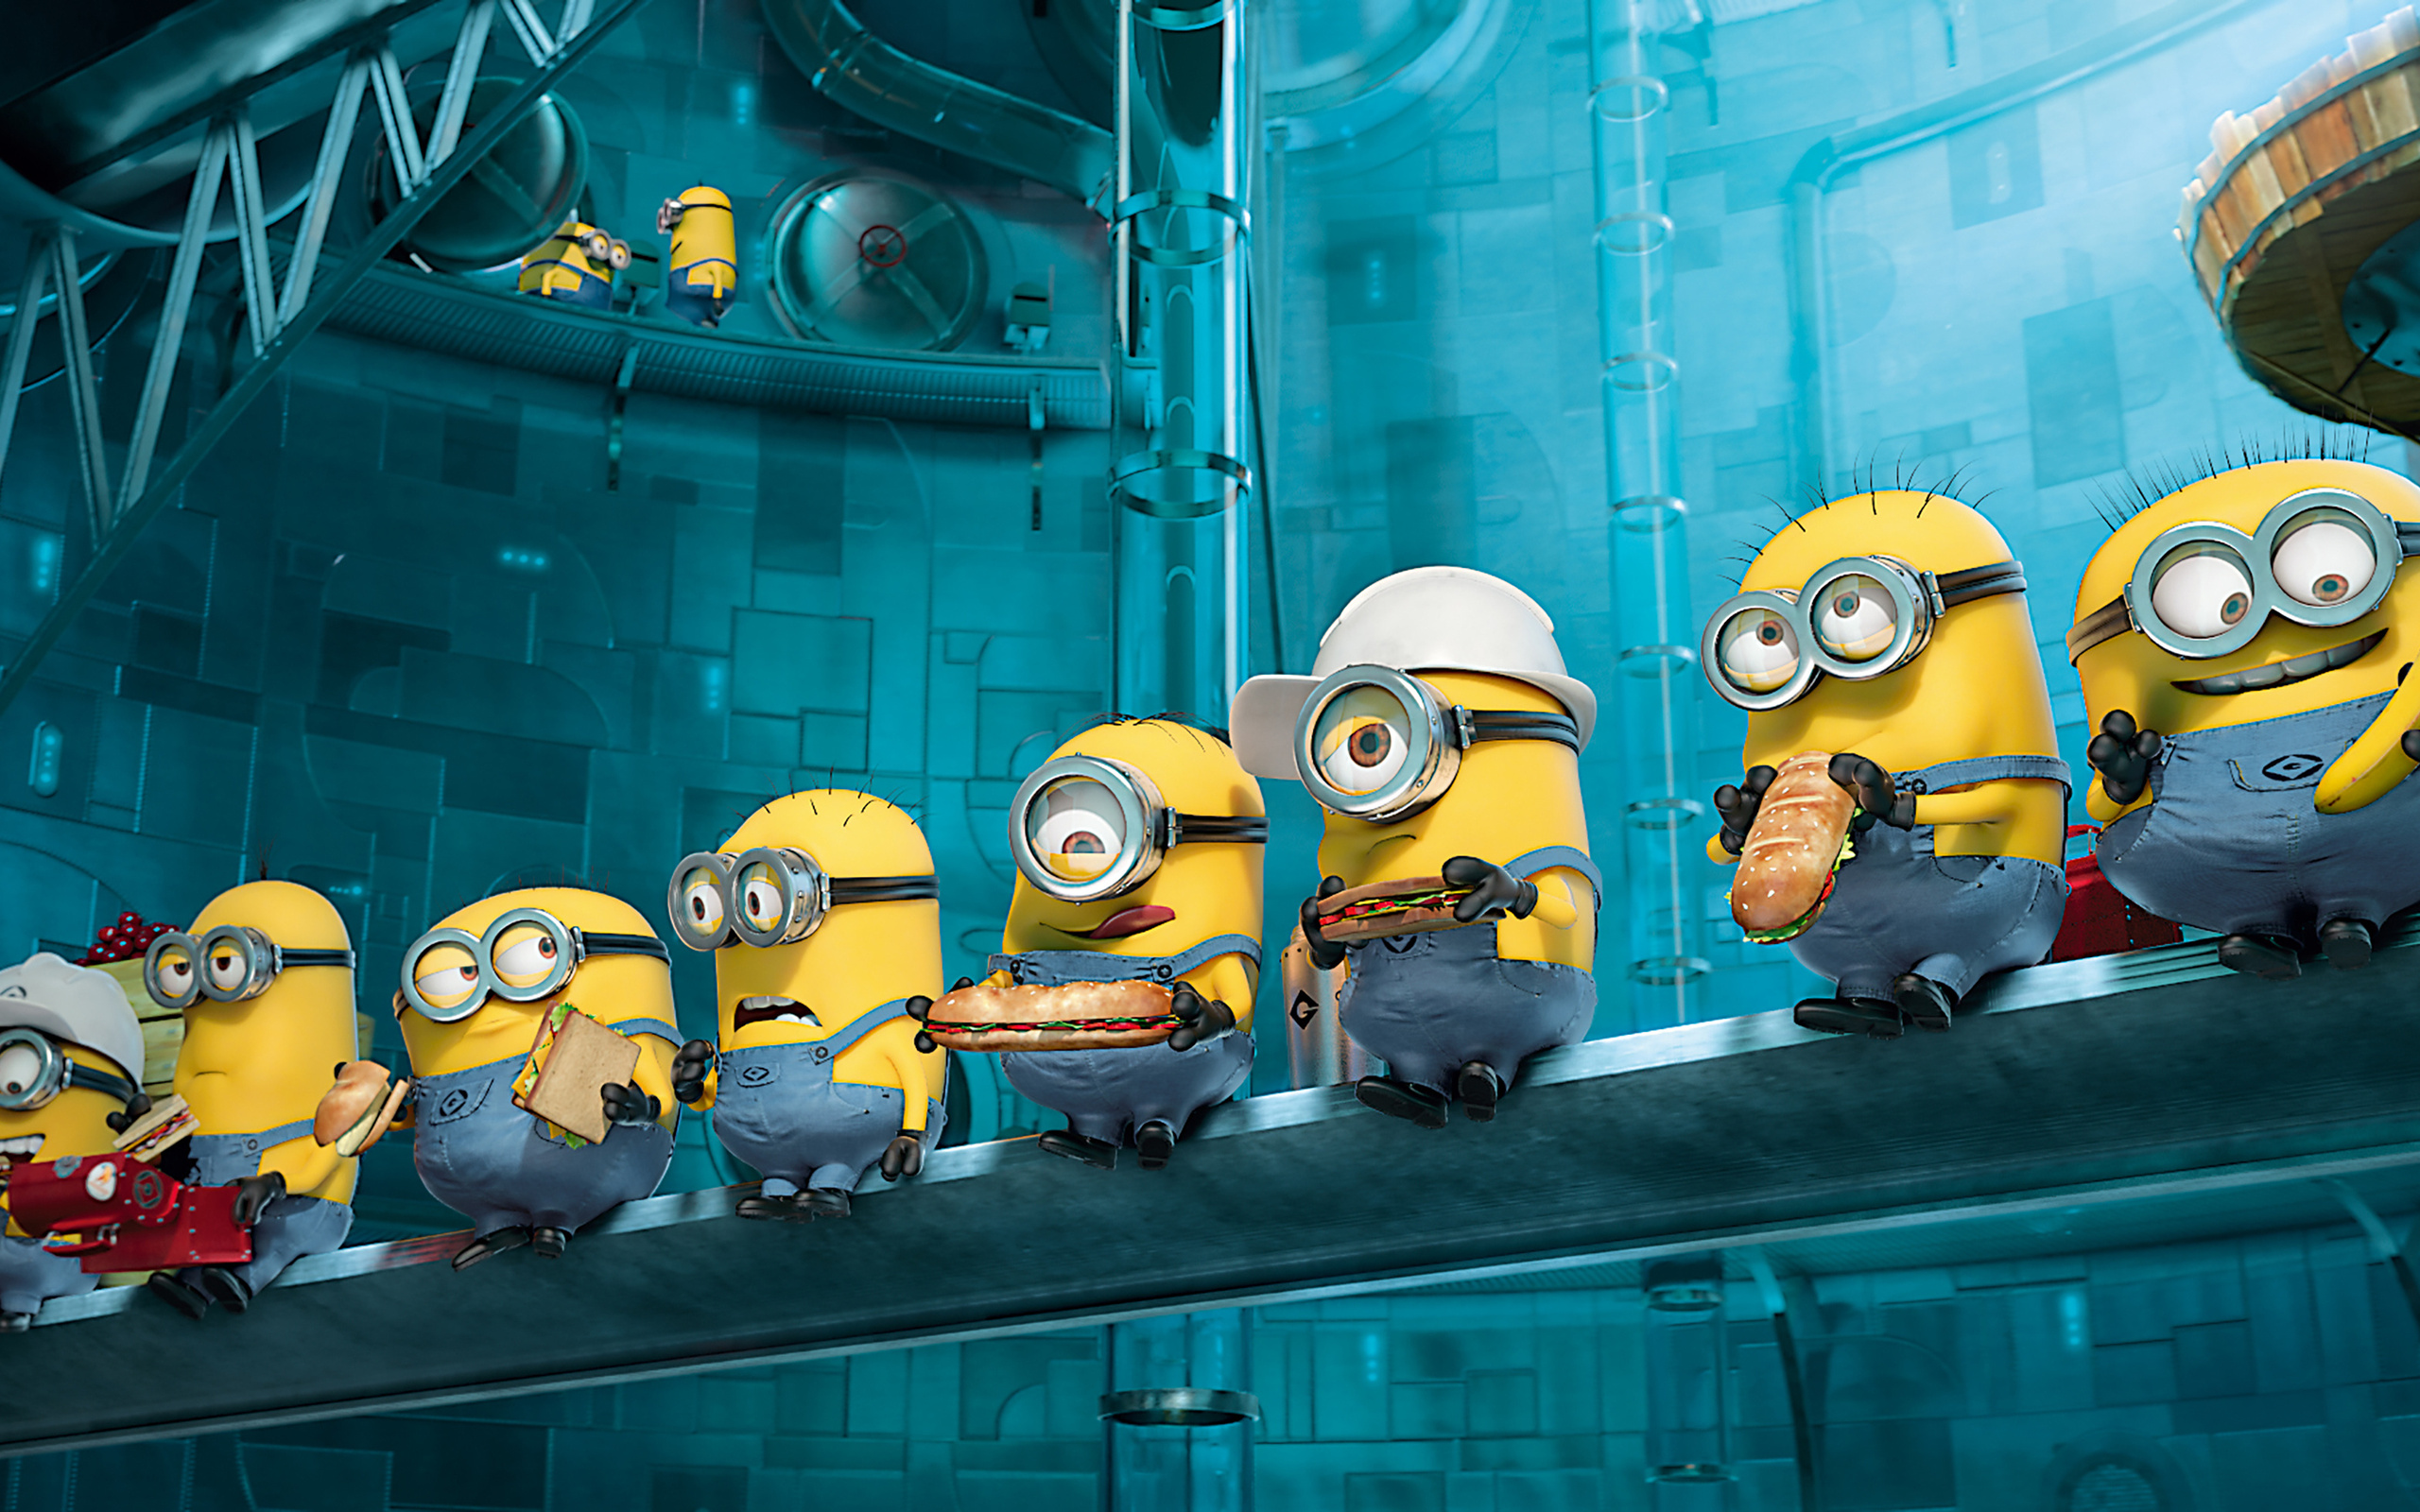 despicable me, despicable me 2, movie cell phone wallpapers